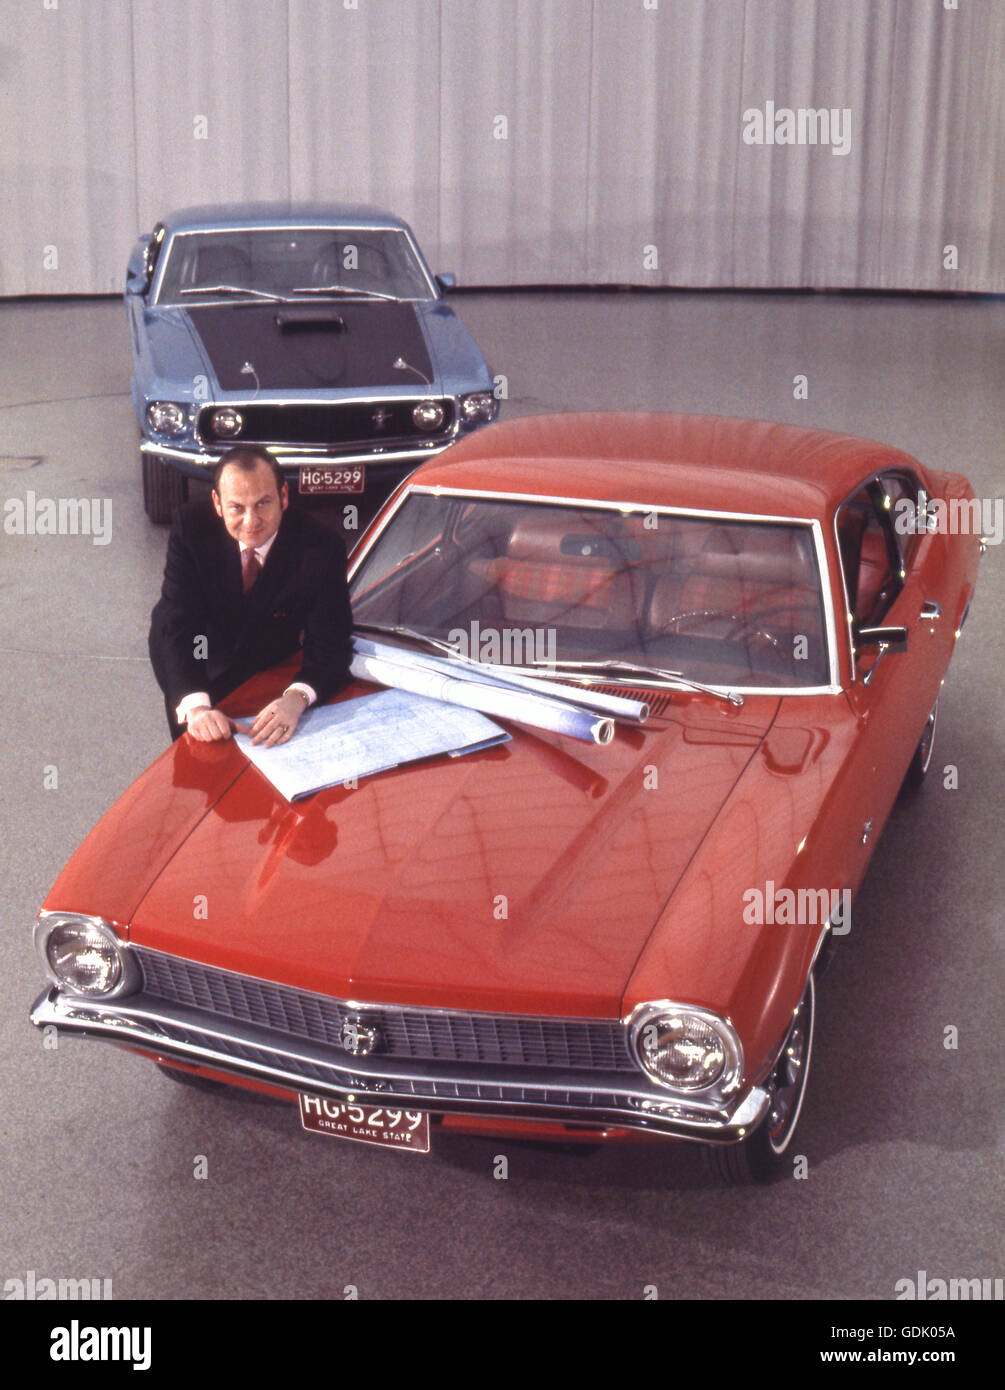 Lee Iacocca with the 1969 Ford Maverick and blueprints Stock Photo